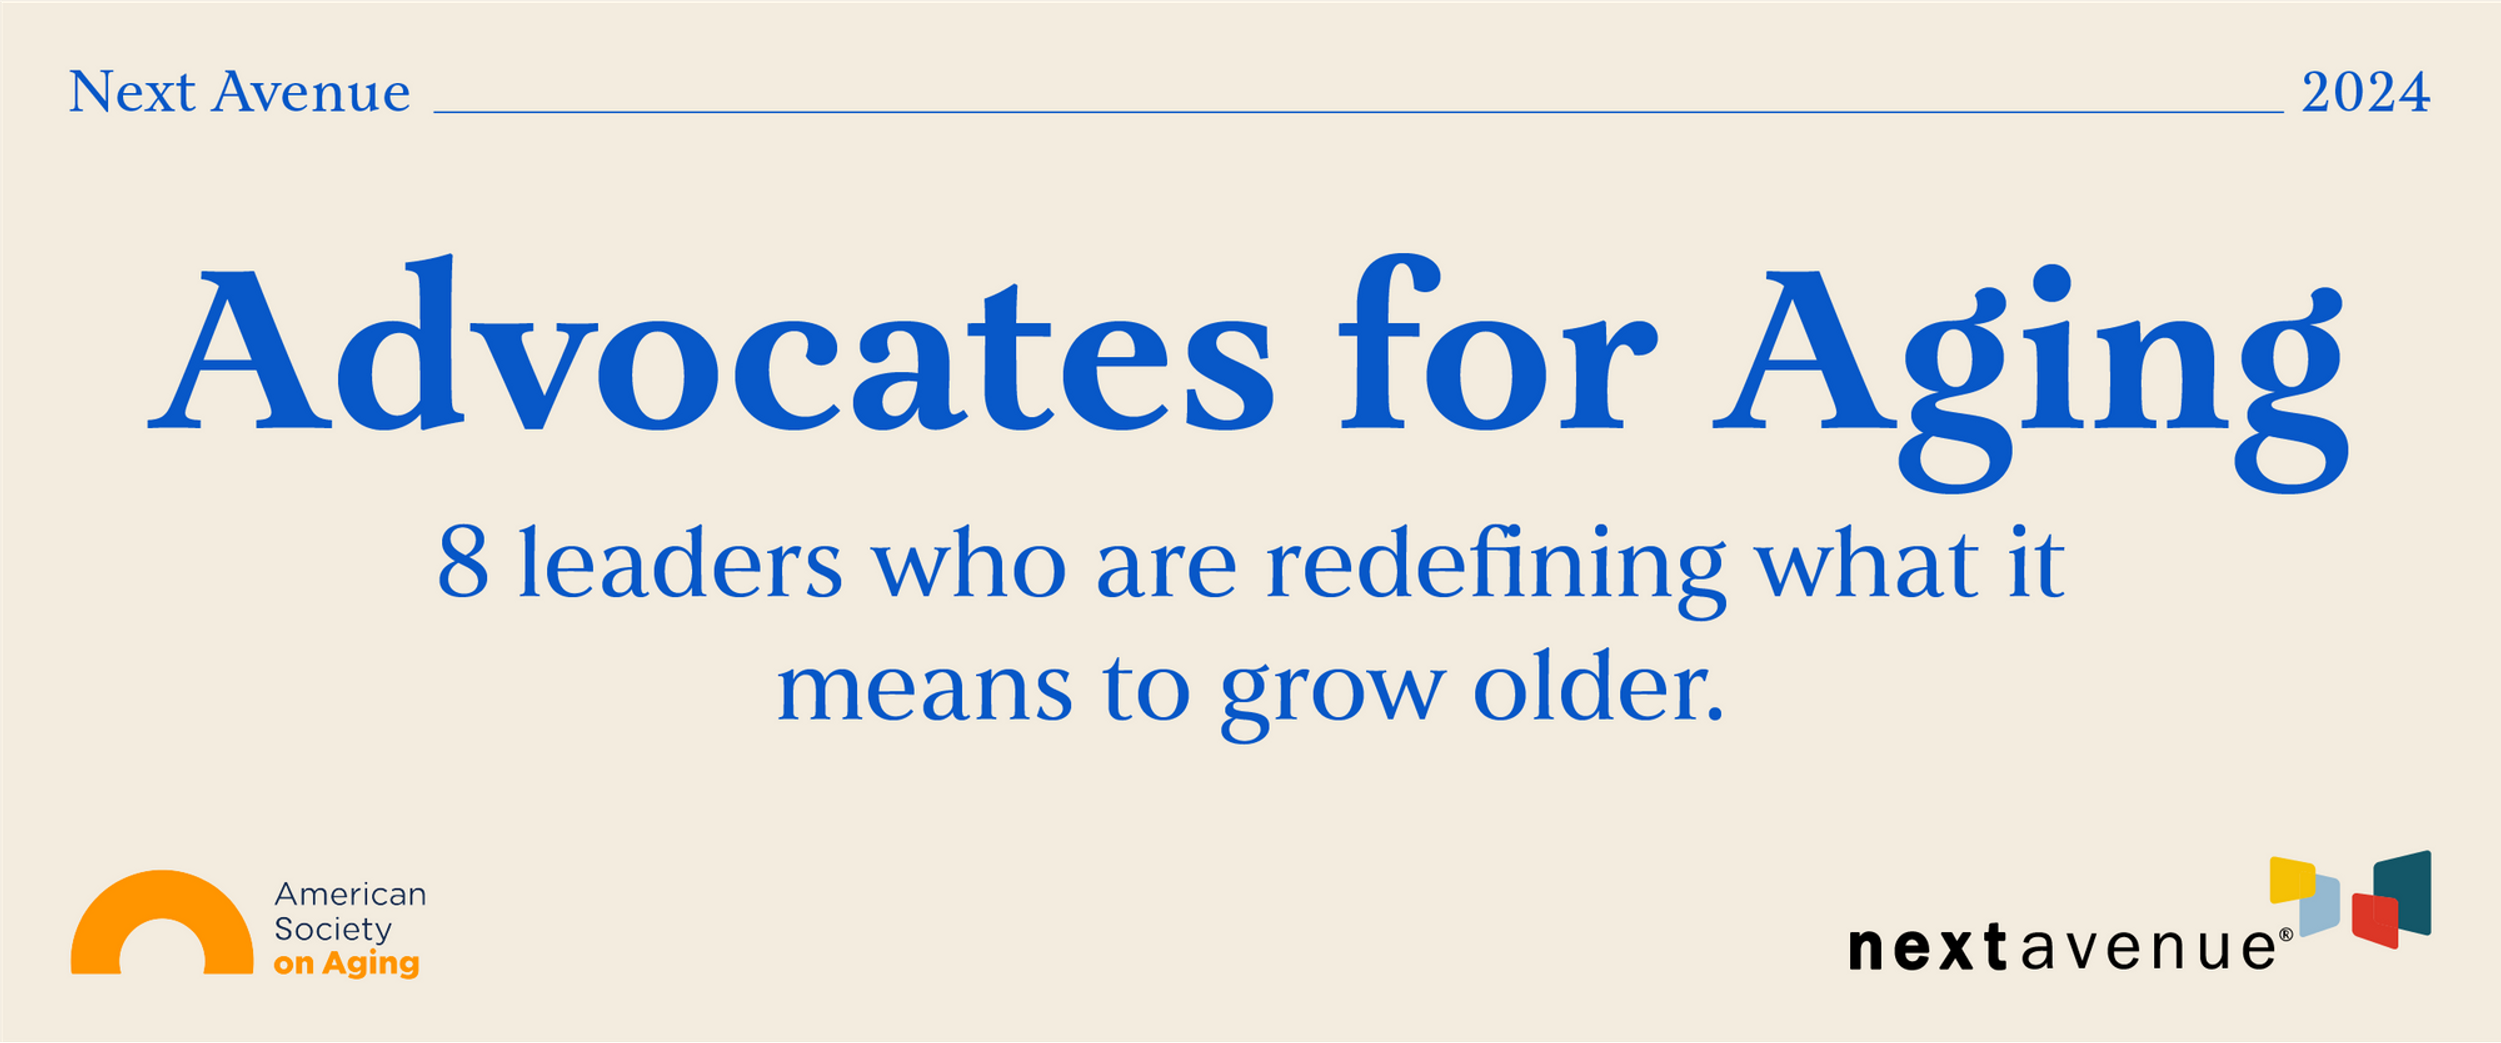 A graphic that says, "Next Avenue 2024 Advocates for Aging".